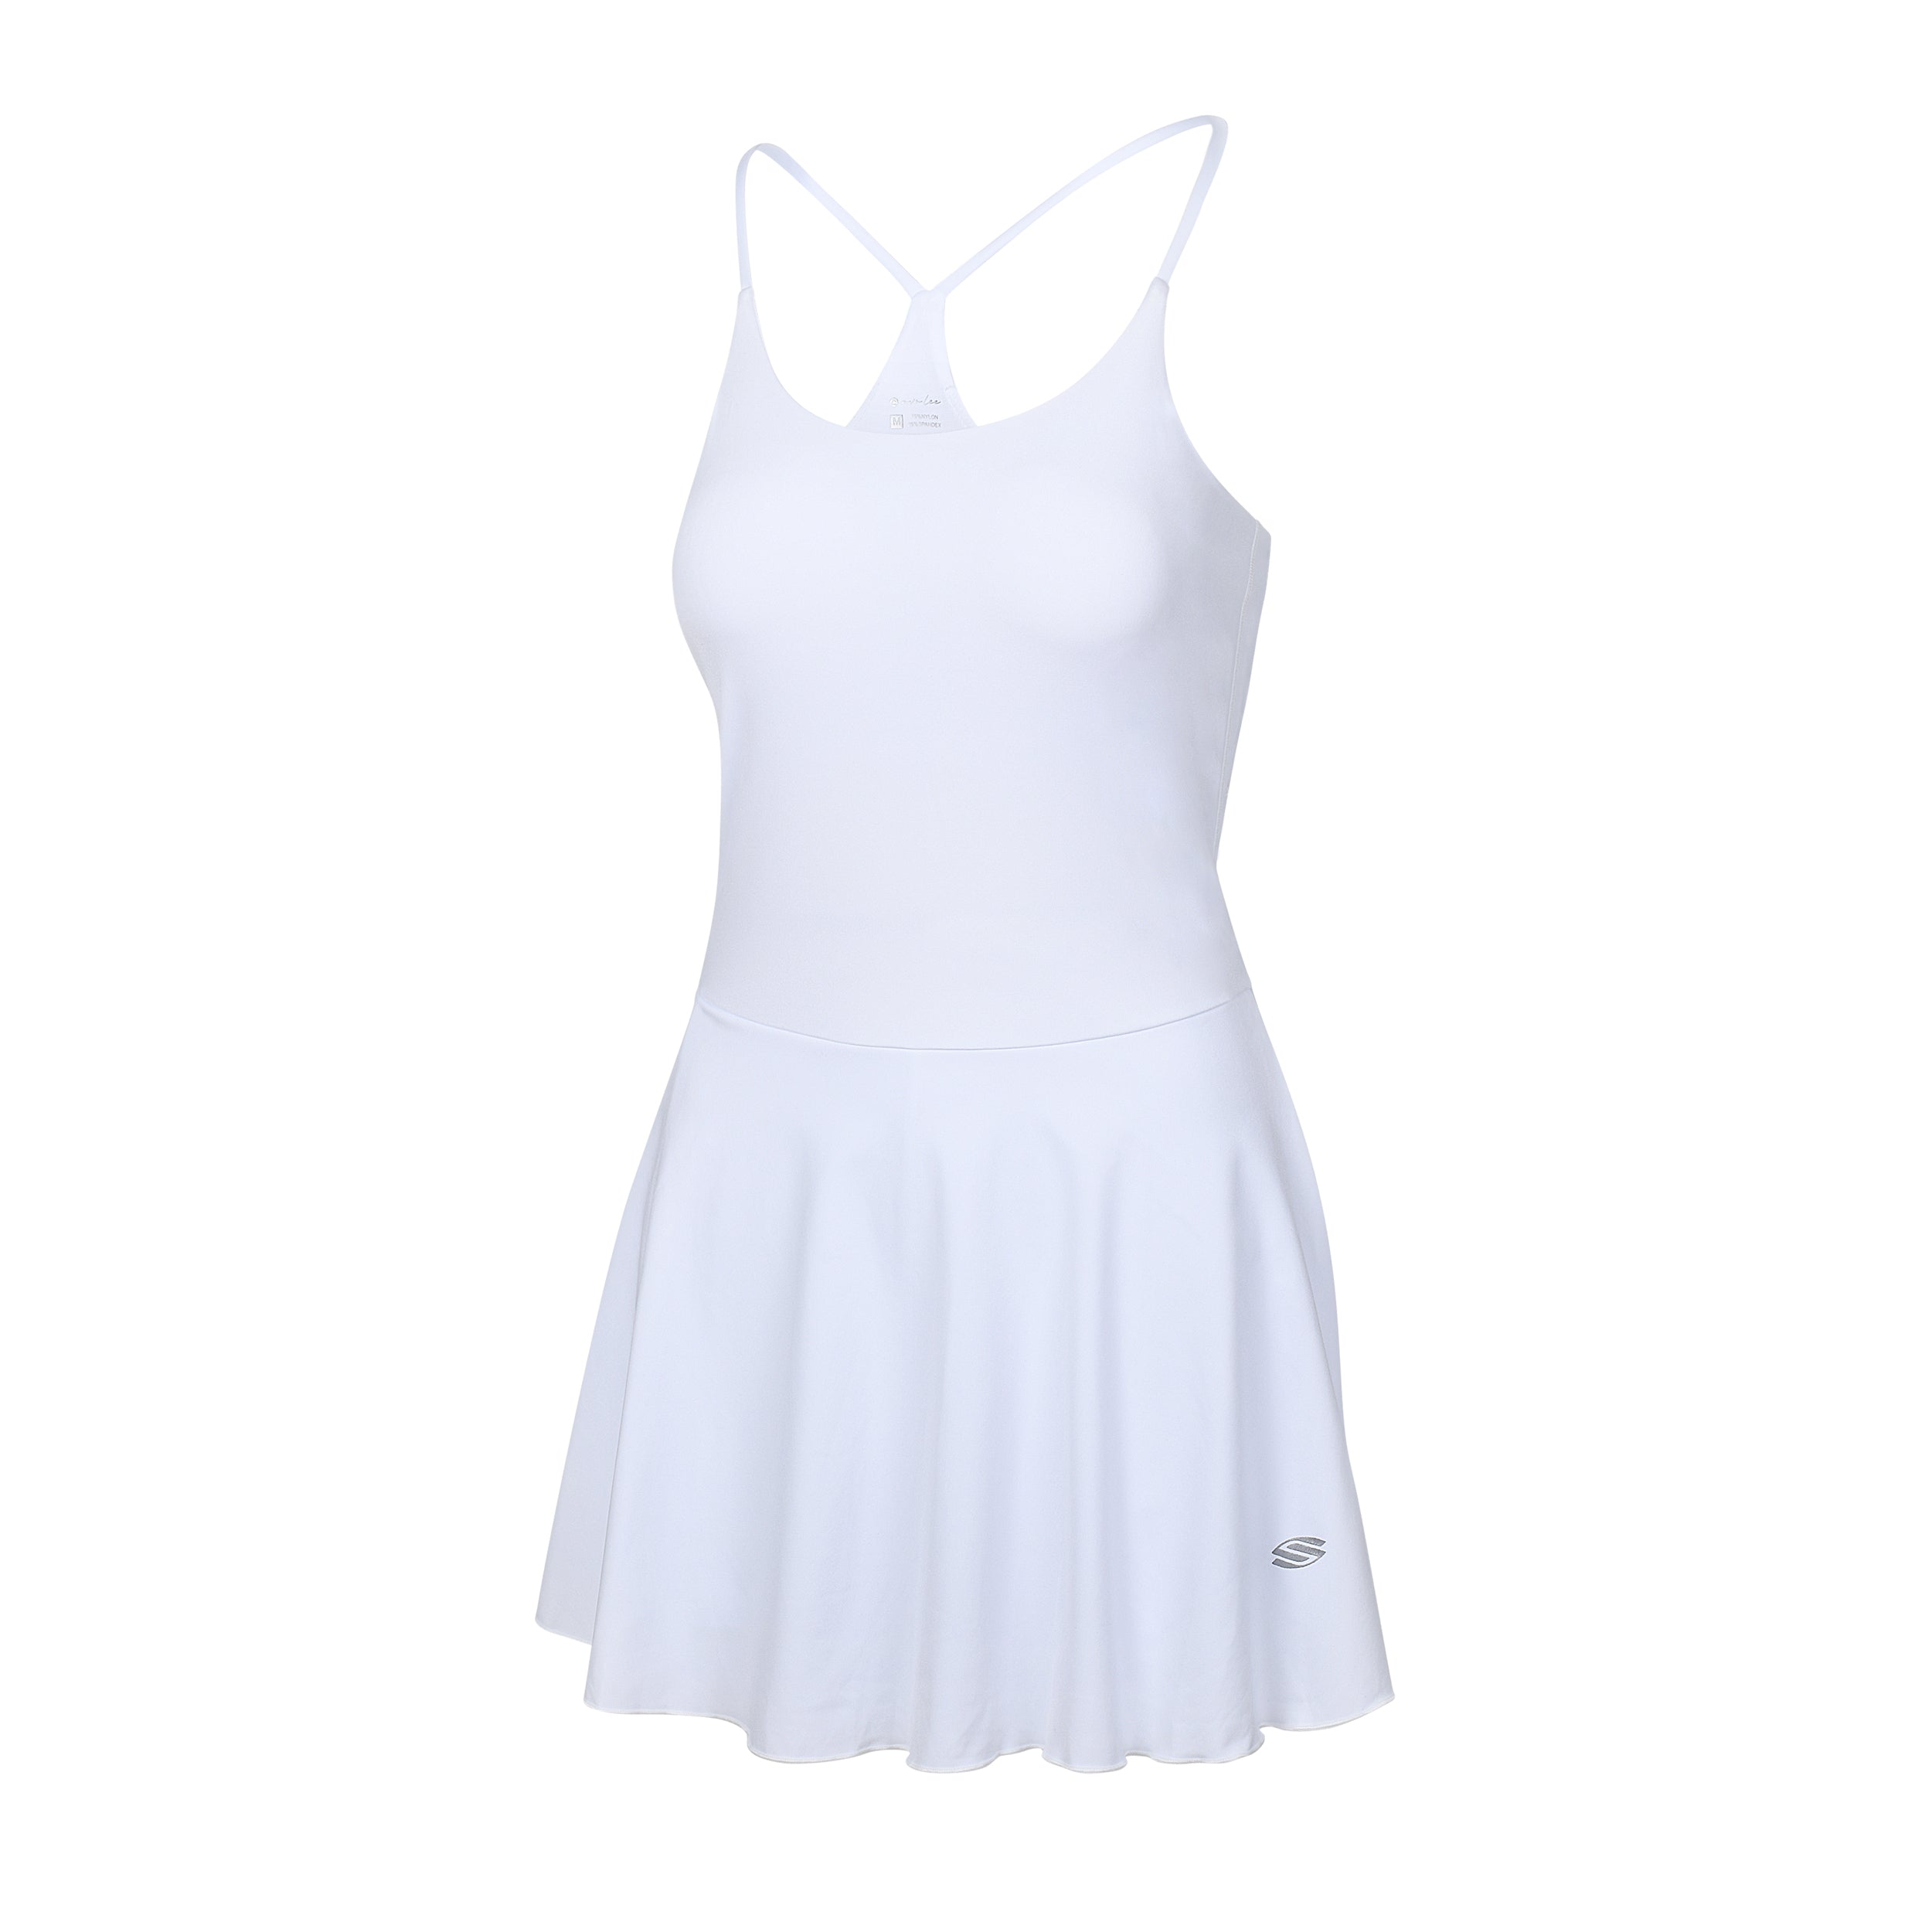 Introducing the Ava Lee Pickleball Court Dress, meticulously designed to redefine your court presence. In black, white, or purple.